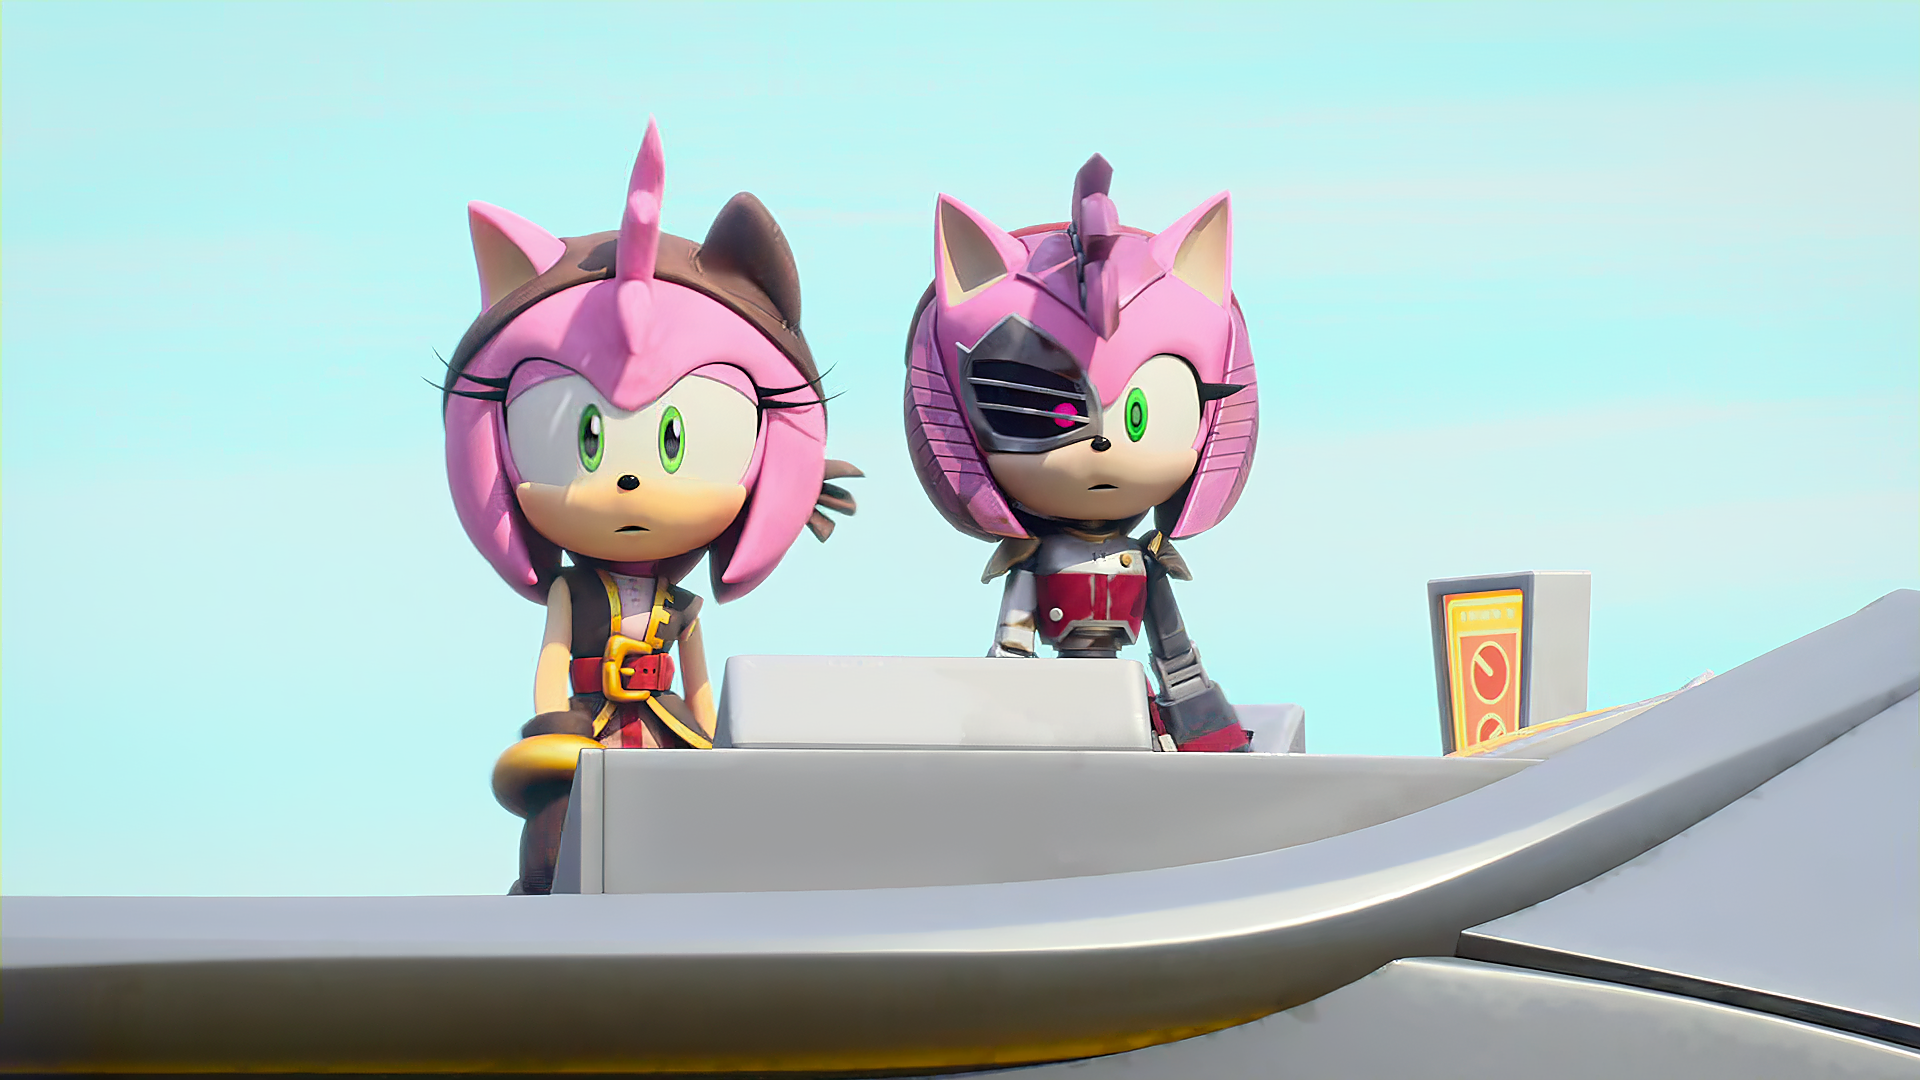 Sonic Prime S1 E4 00 03 36 18 by rosewitchcat on DeviantArt